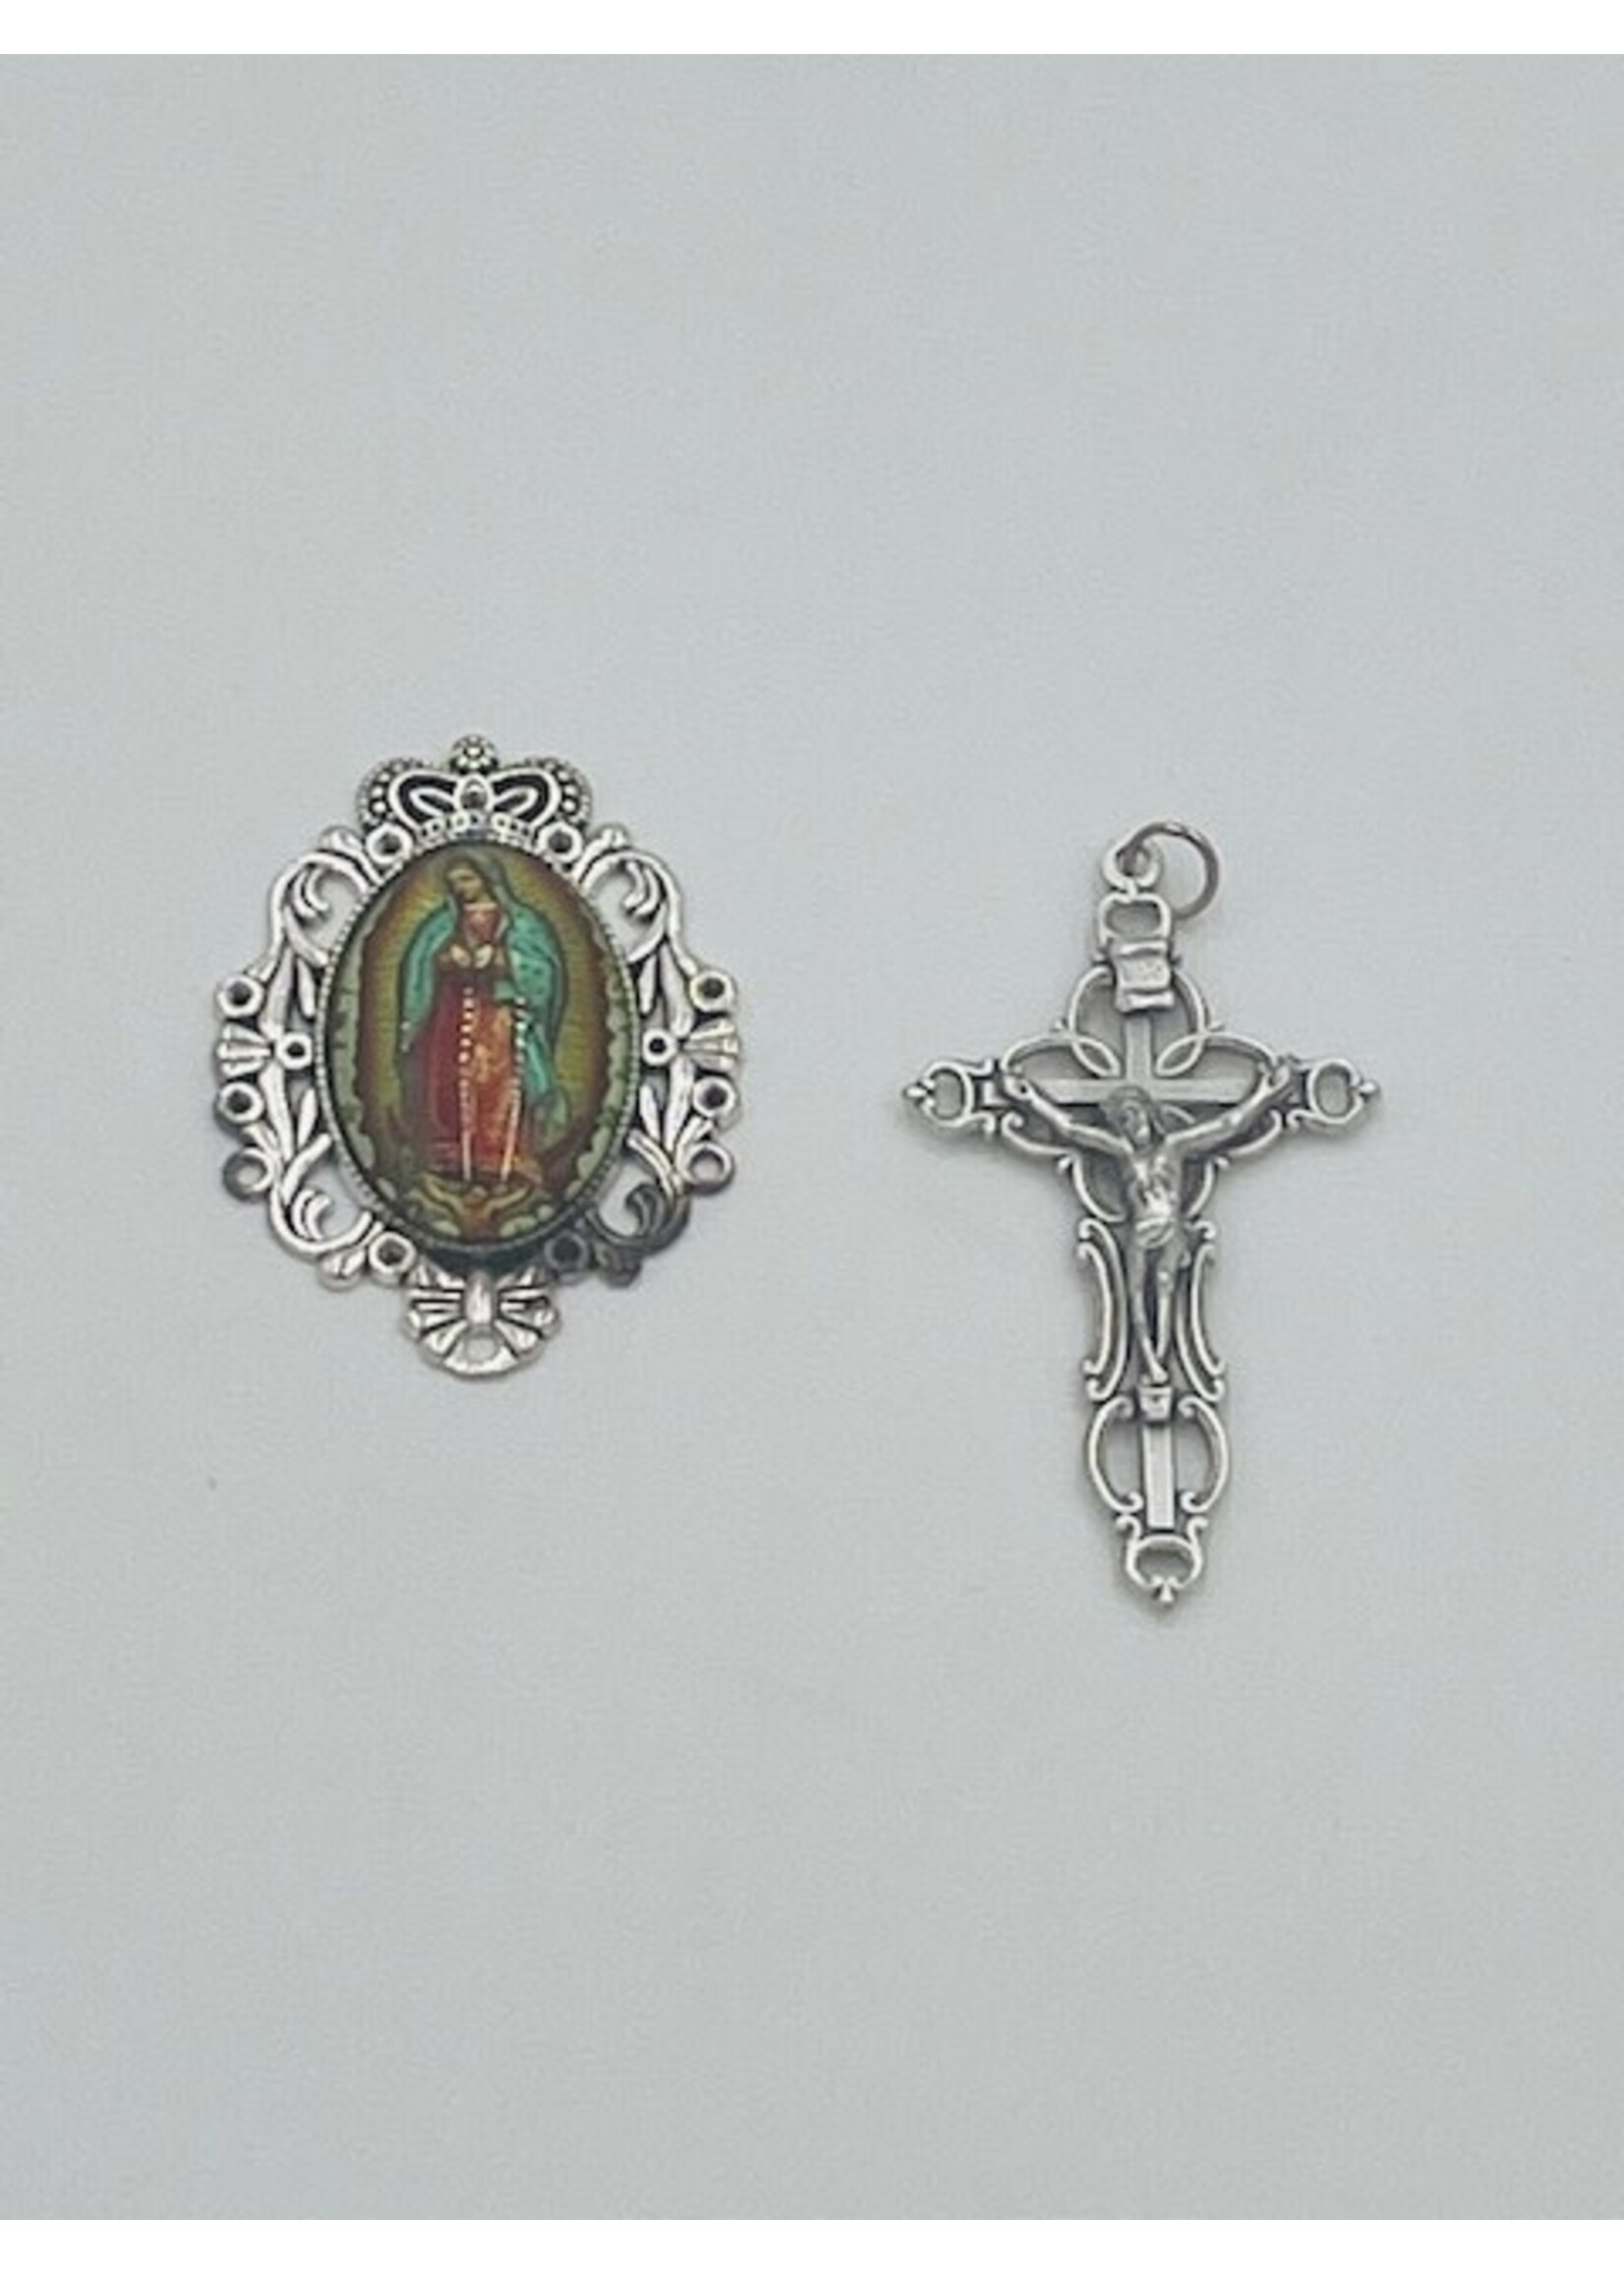 Our Lady of Guadalupe Rosary Center + Crucifix Set